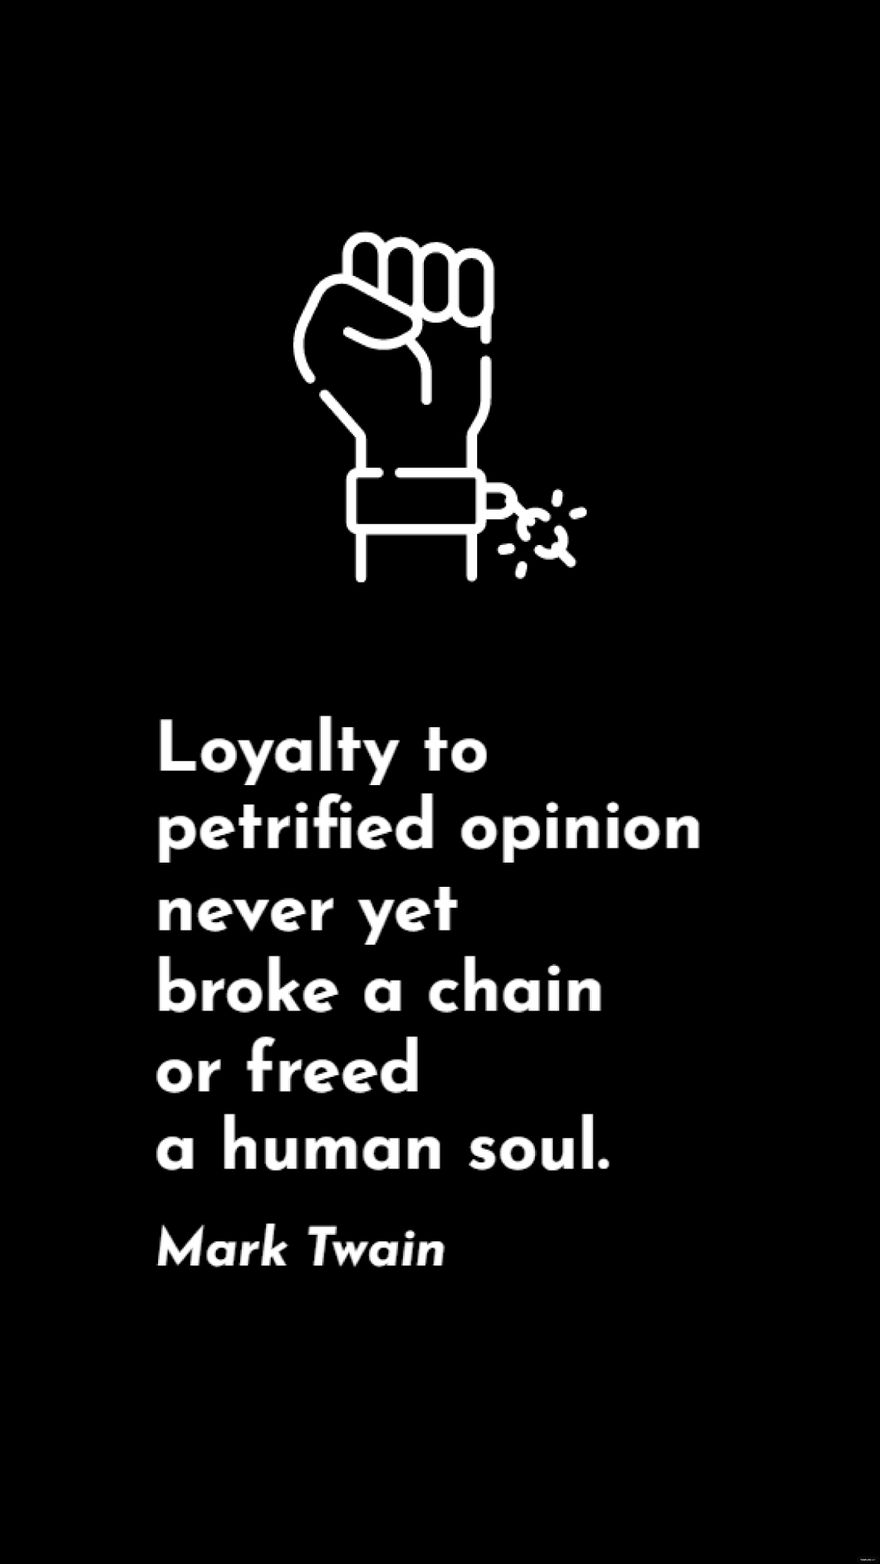 Free Mark Twain - Loyalty to petrified opinion never yet broke a chain or freed a human soul. in JPG